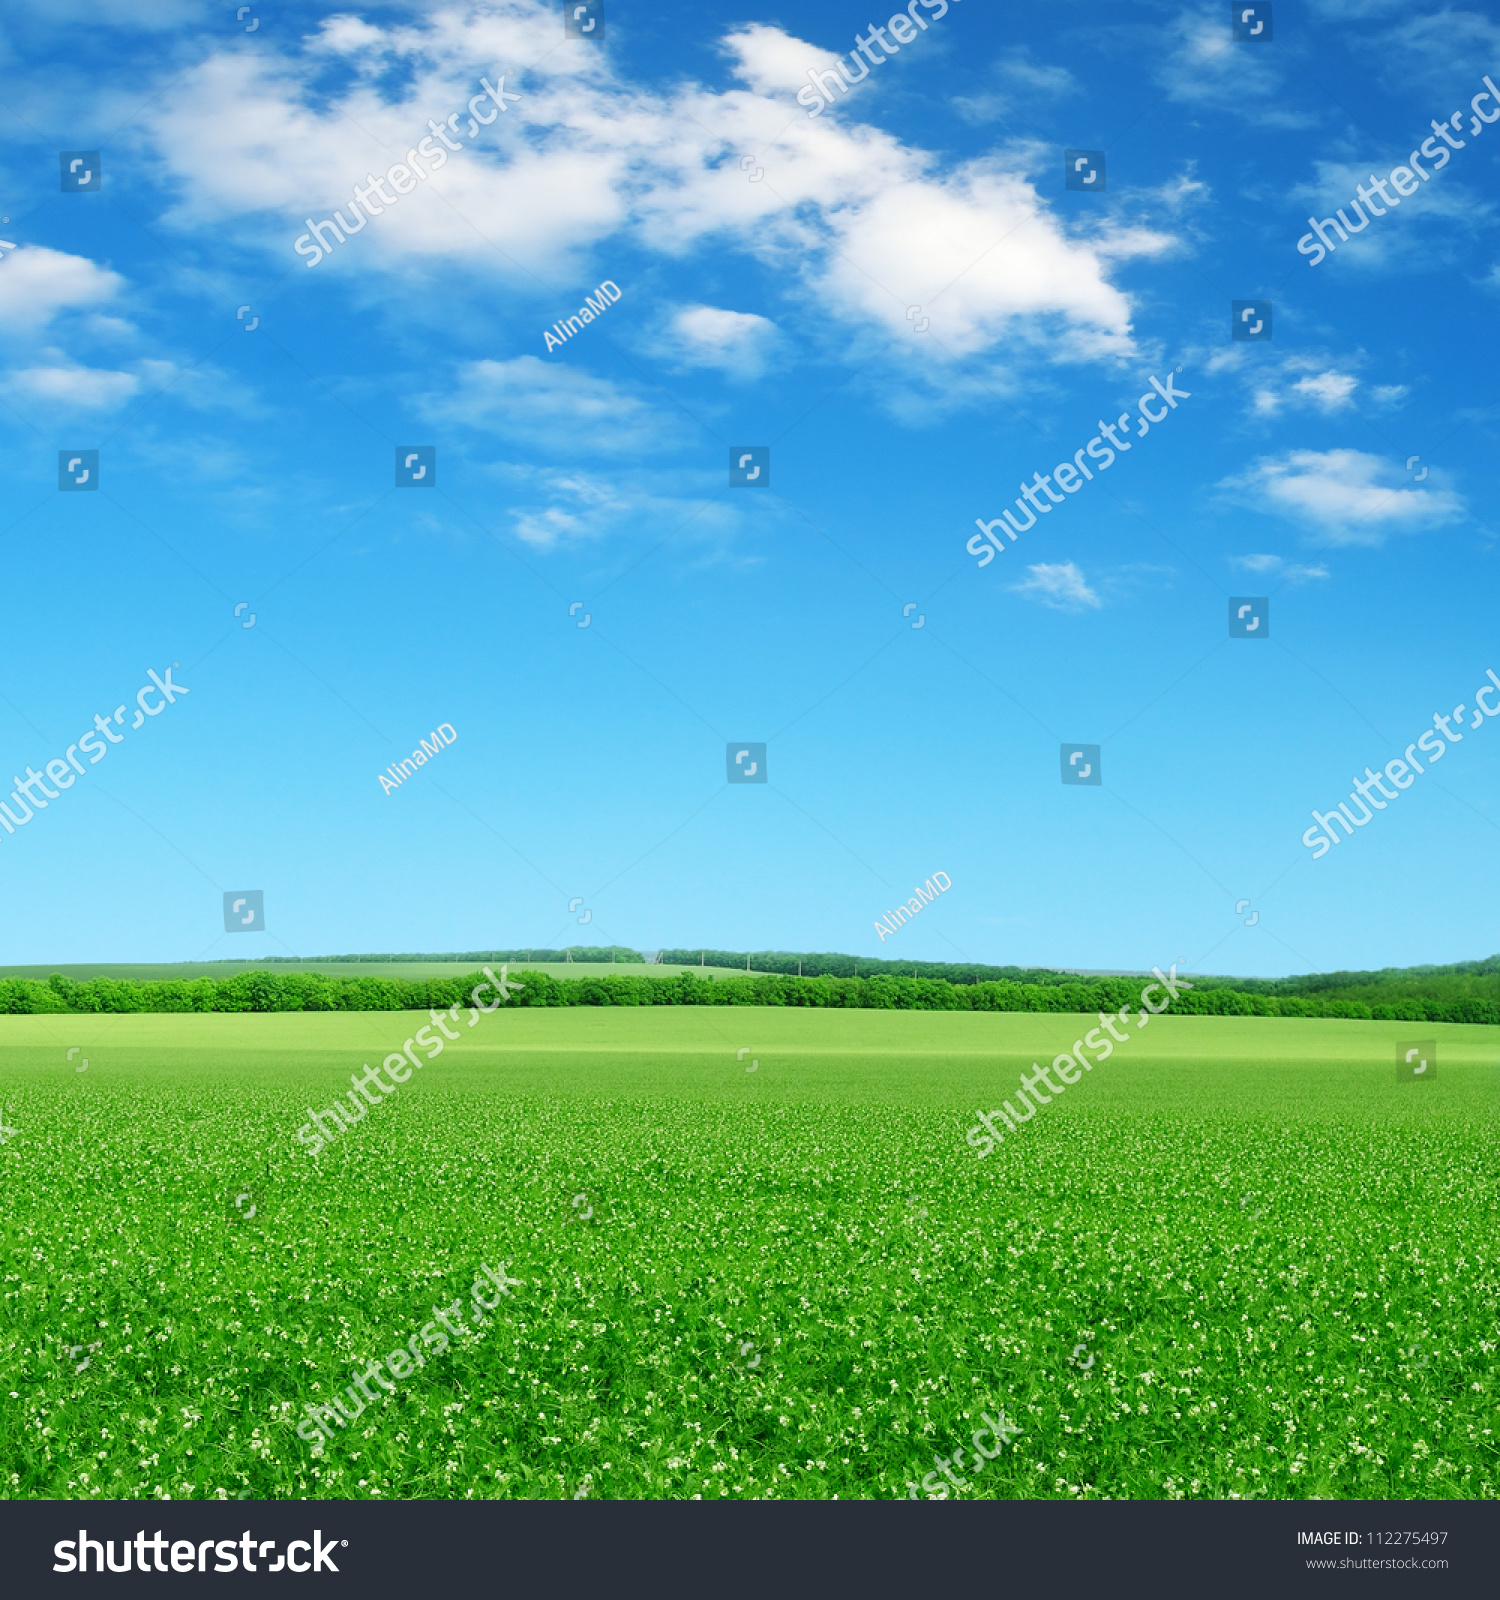 green field and blue sky with light clouds #112275497